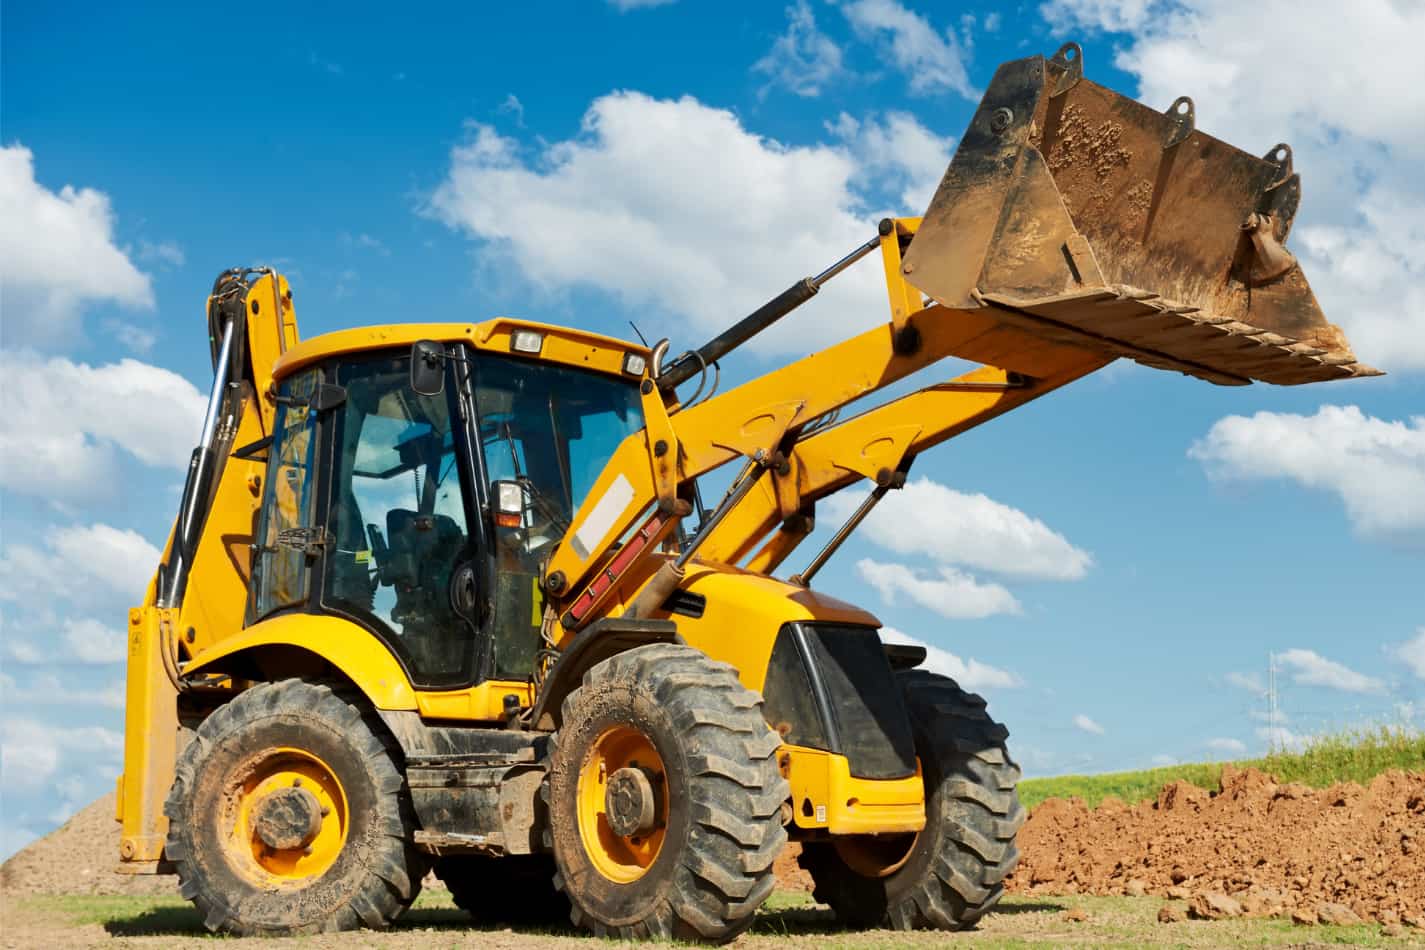 Backhoe Cost: What is the Cost to Purchase and Own